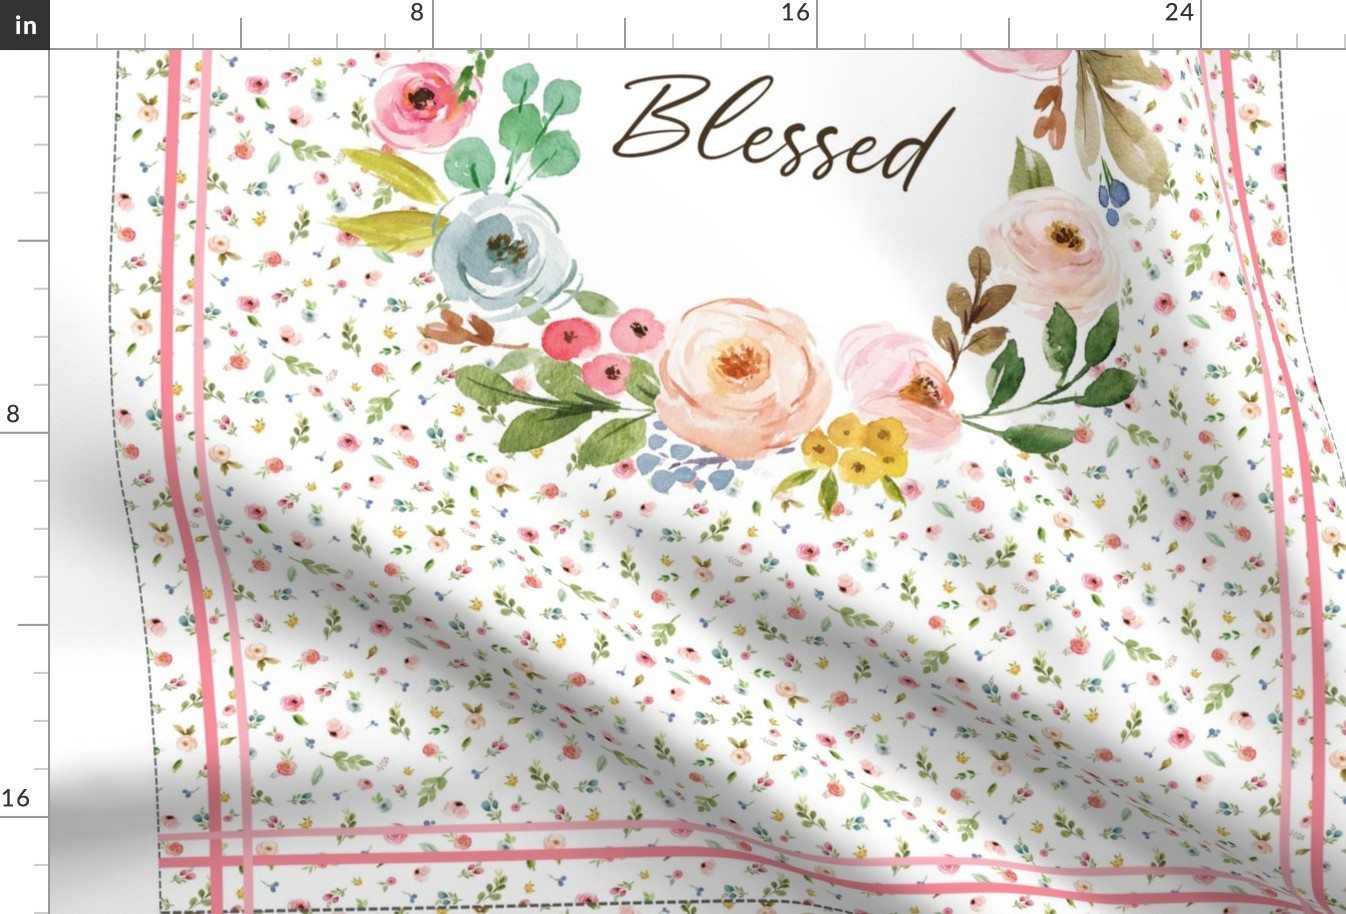 54” x 36” MINKY Blessed Floral Wreath Panel- Woodland Pink Blush Peach Blue Flowers, FABRIC MUST be 54” or WIDER, Two 24” x 36” panels per yard